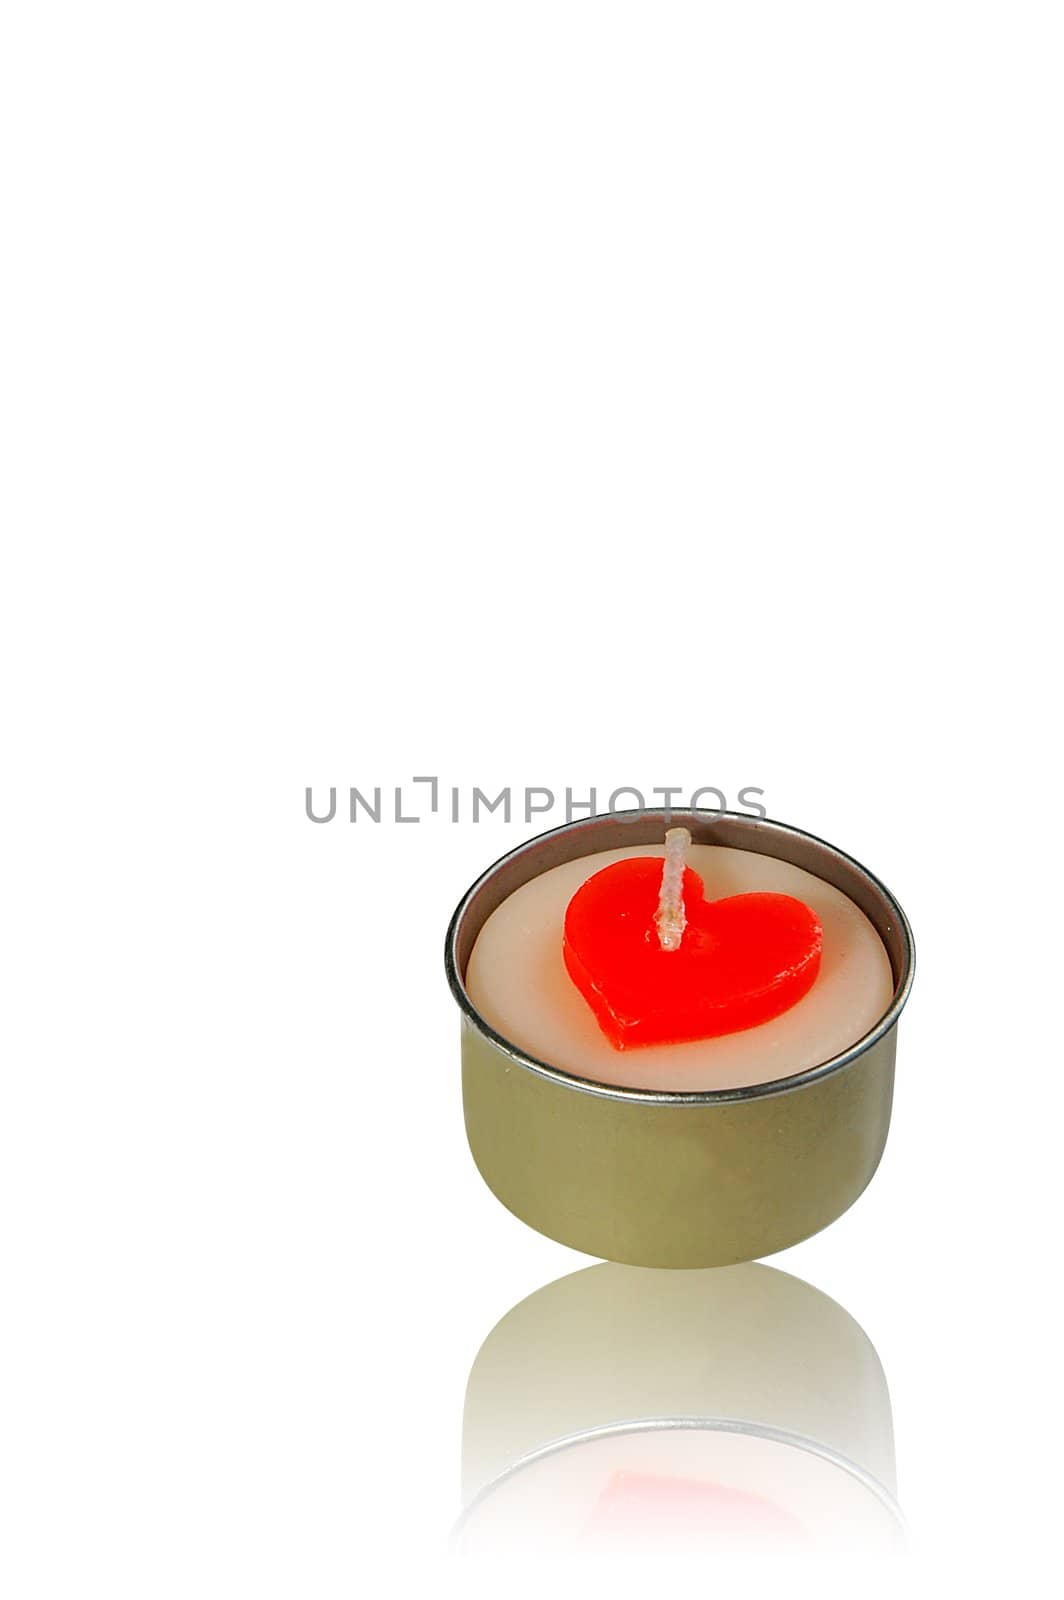 Heart shaped love candle with clipping path